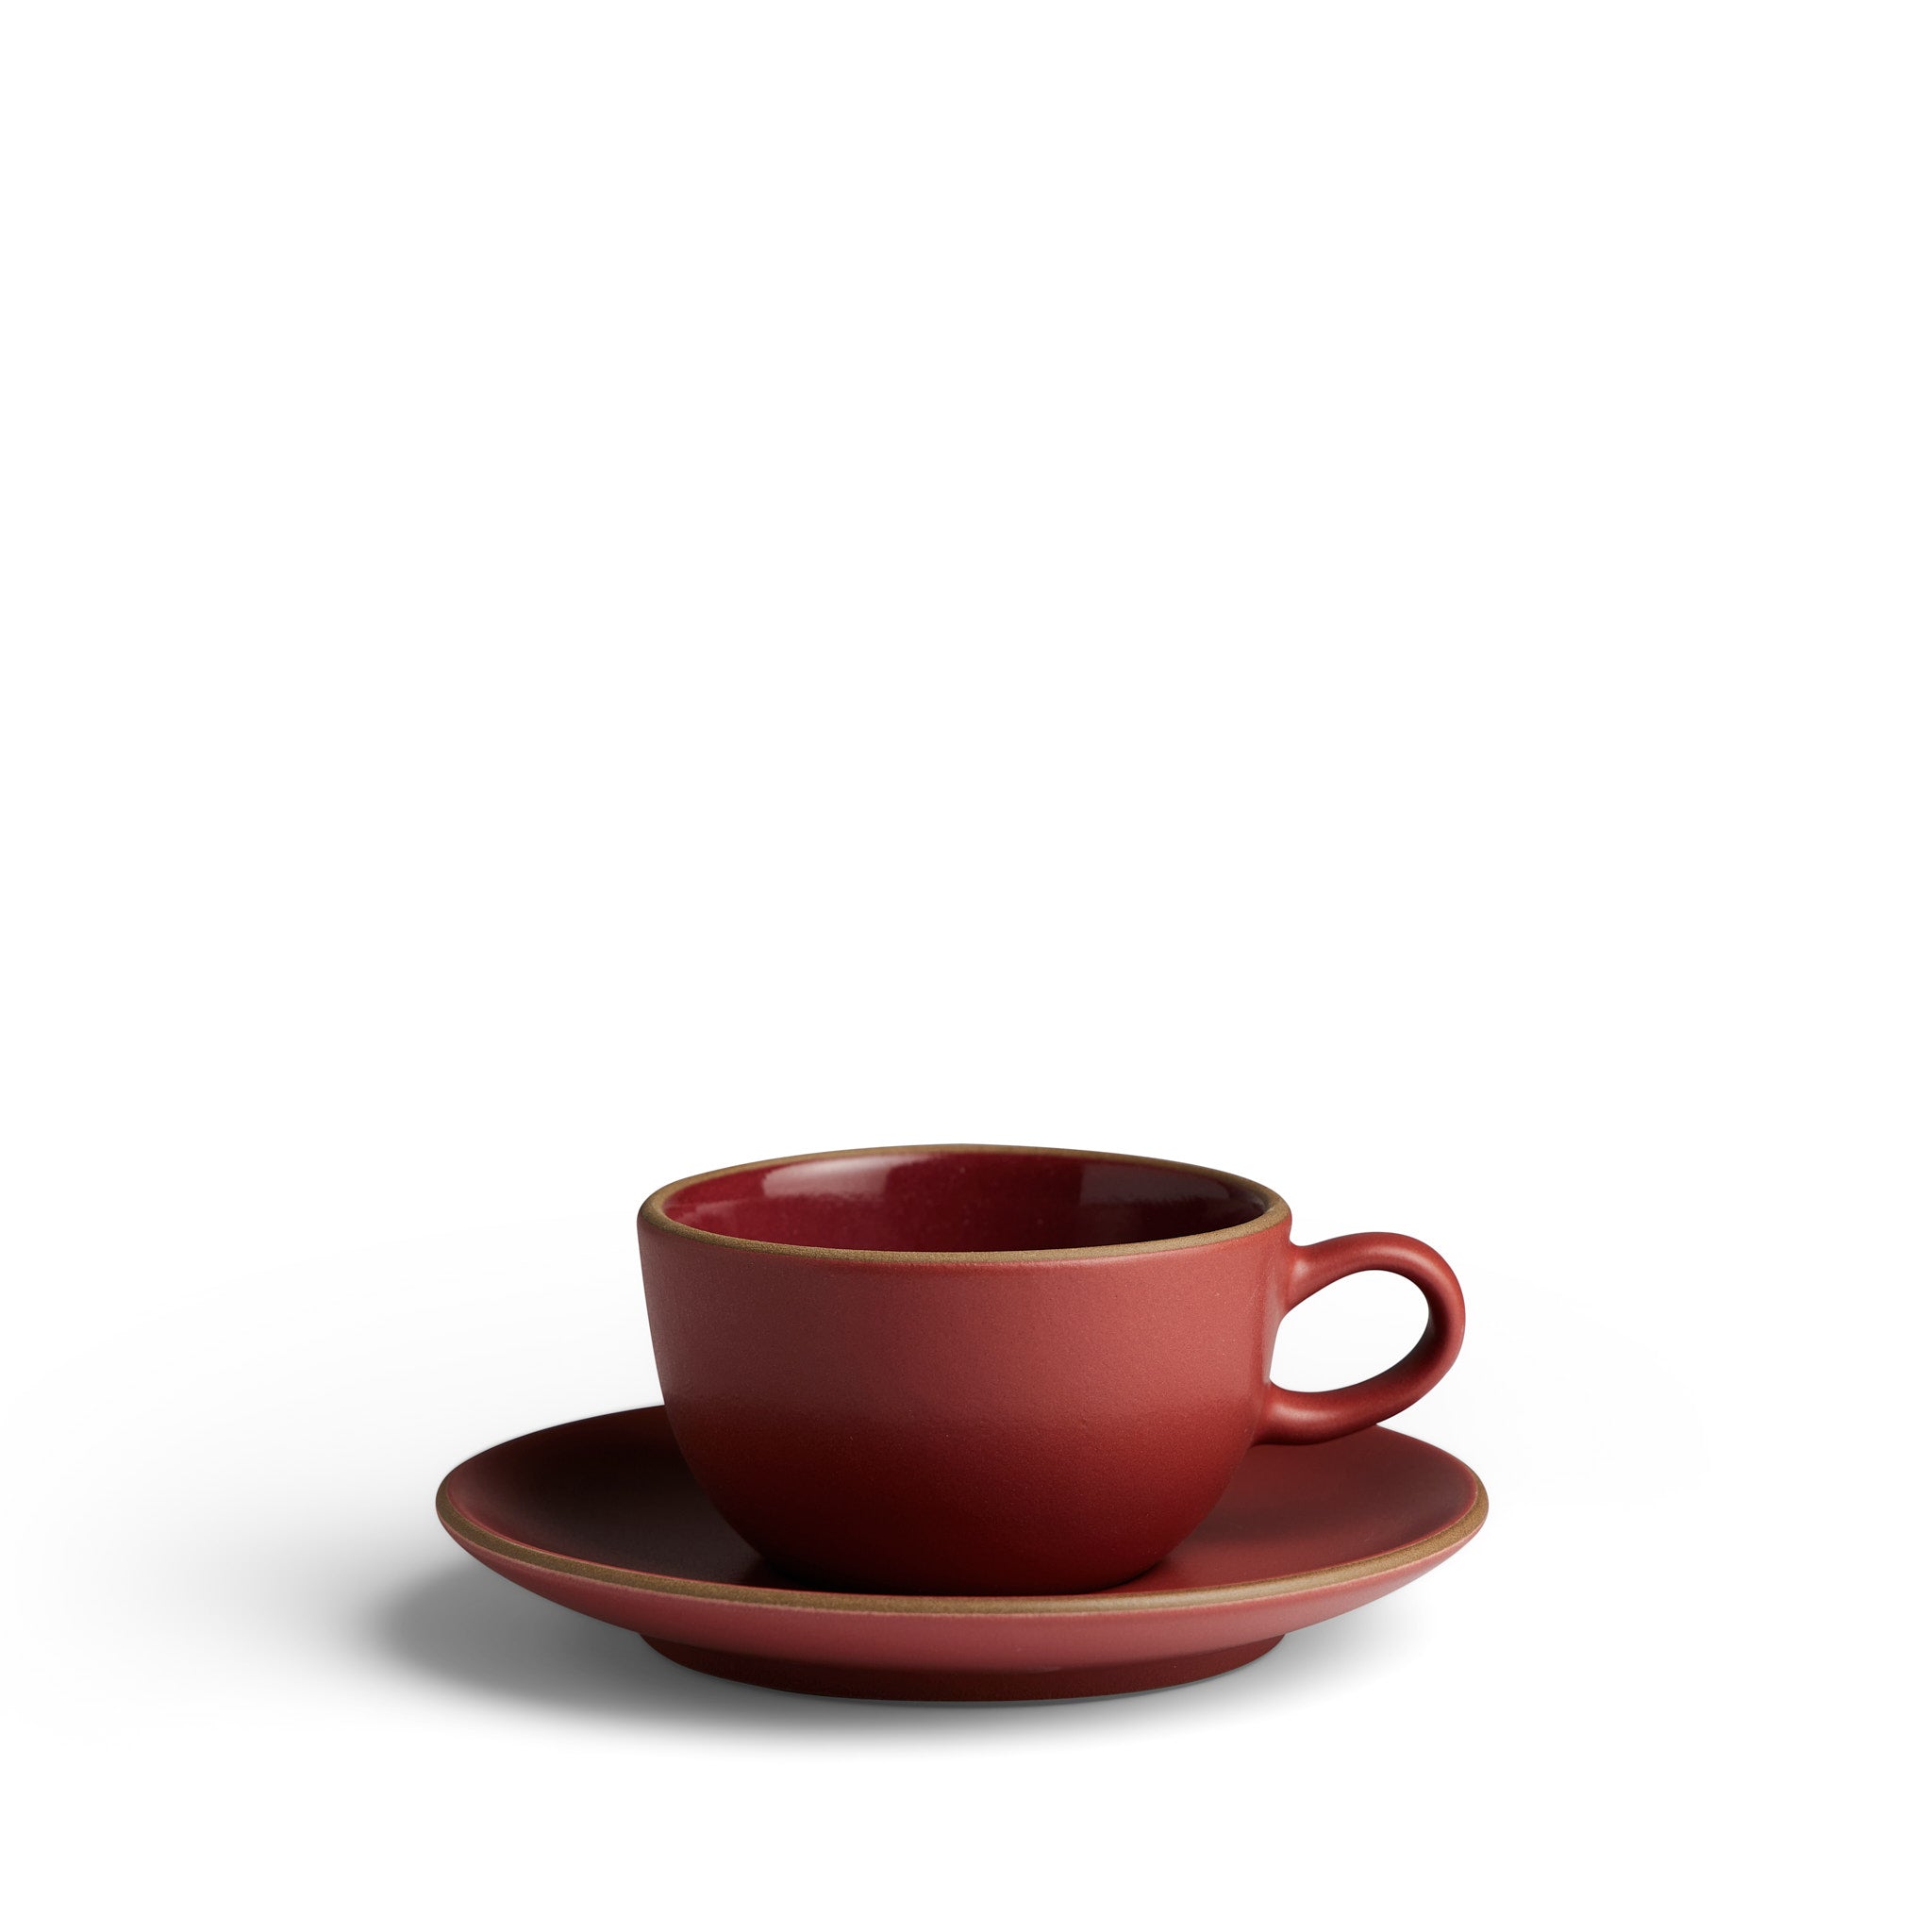 Teacup & Saucer Red Plum/Chile Zoom Image 1